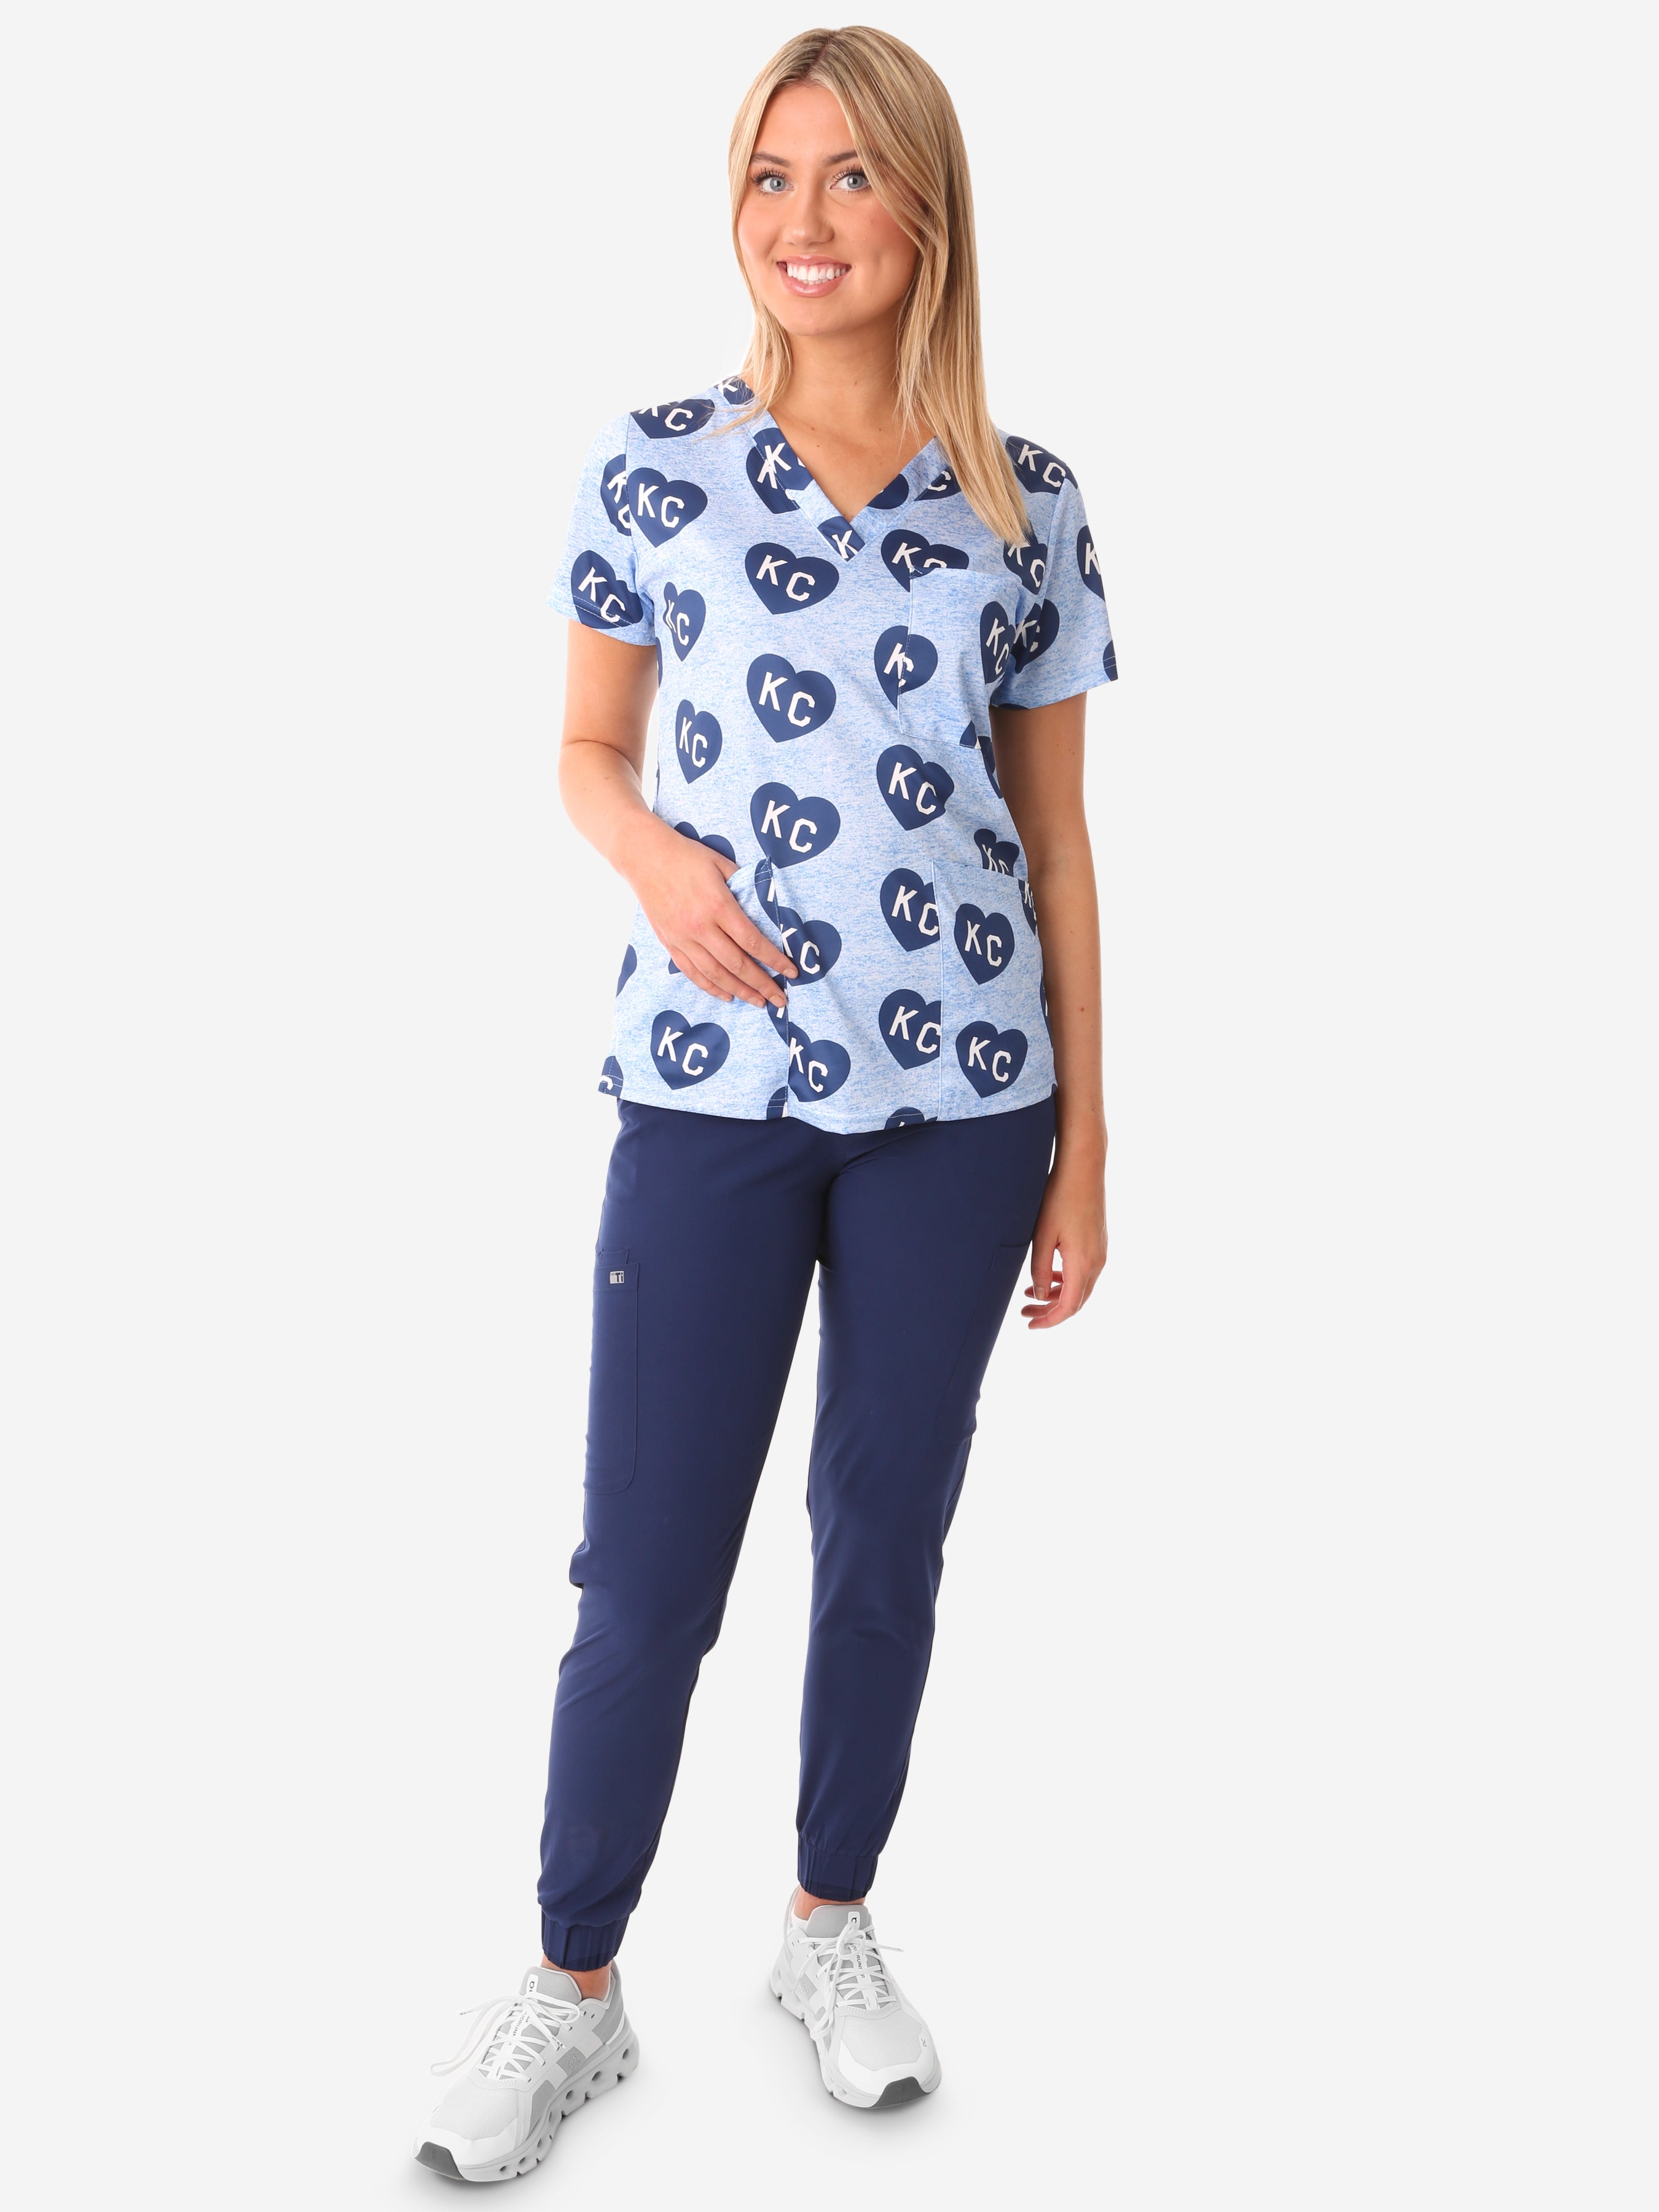 Women&#39;s Charlie Hustle Scrub Top All-Over KC Heart Design 3 Pockets with Navy Jogger Scrub Pants_Full Body_Front